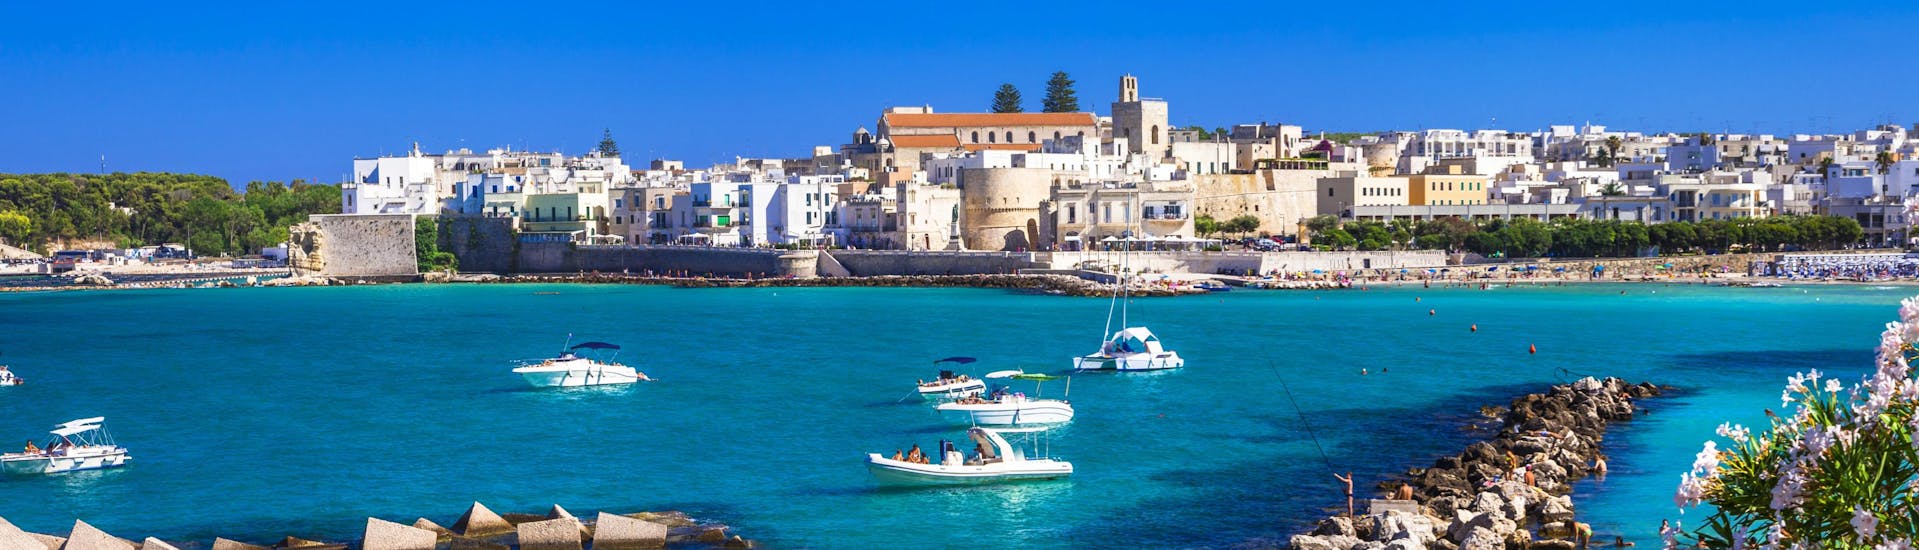 The city of Otranto seen by the sea, a beautiful view that you can enjoy during a boat trip.